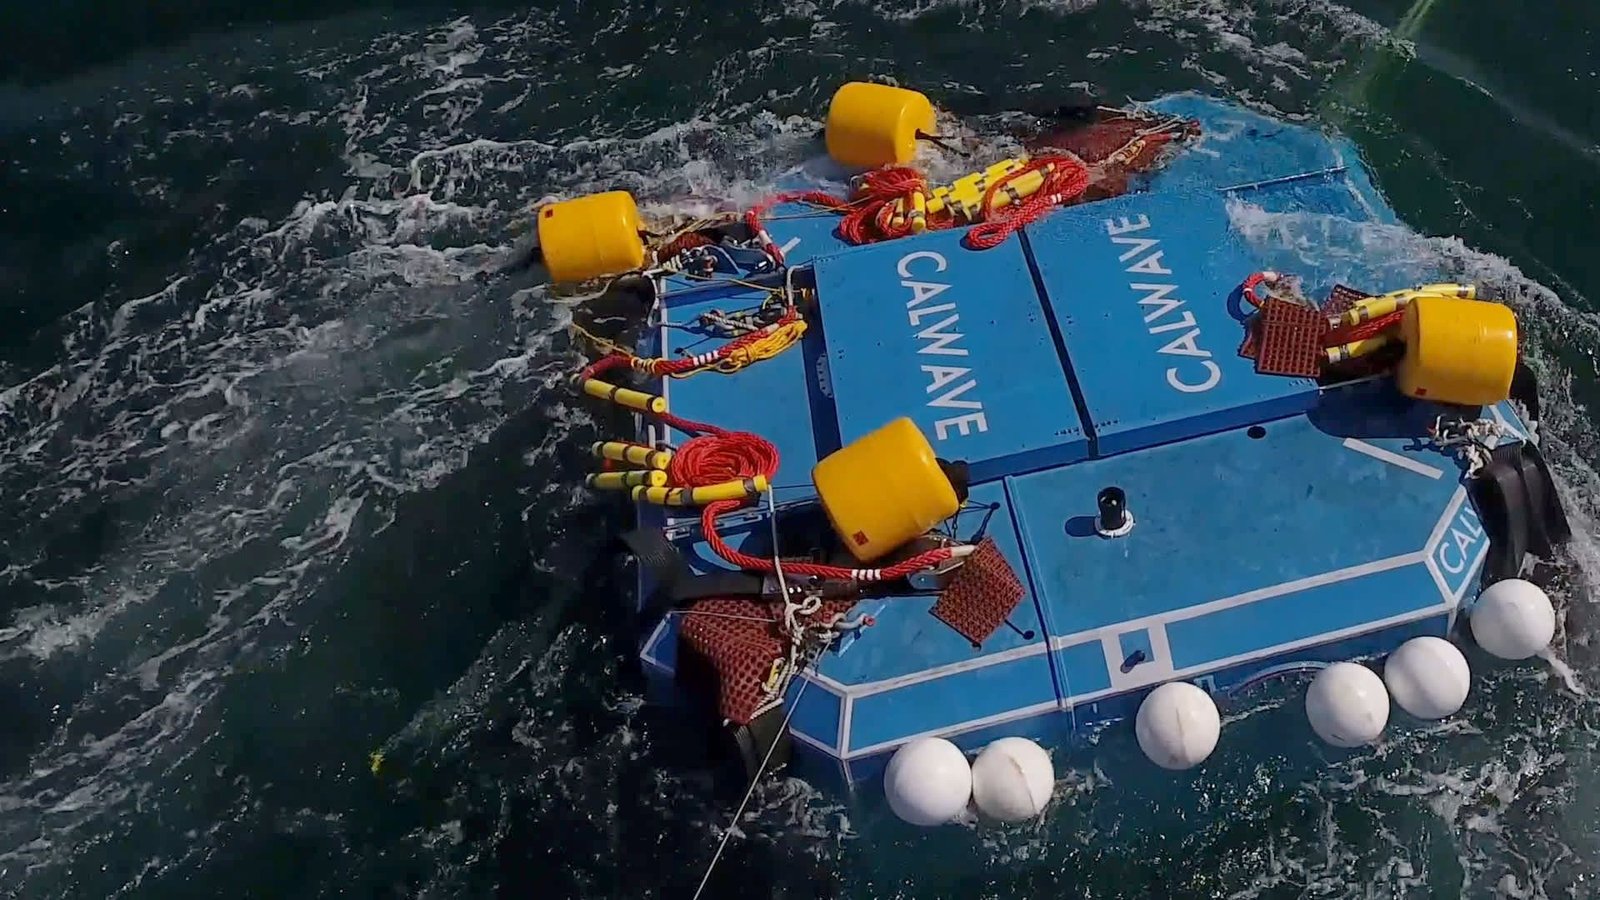 CalWave - The Newest Startup Trying To Harness Wave Energy